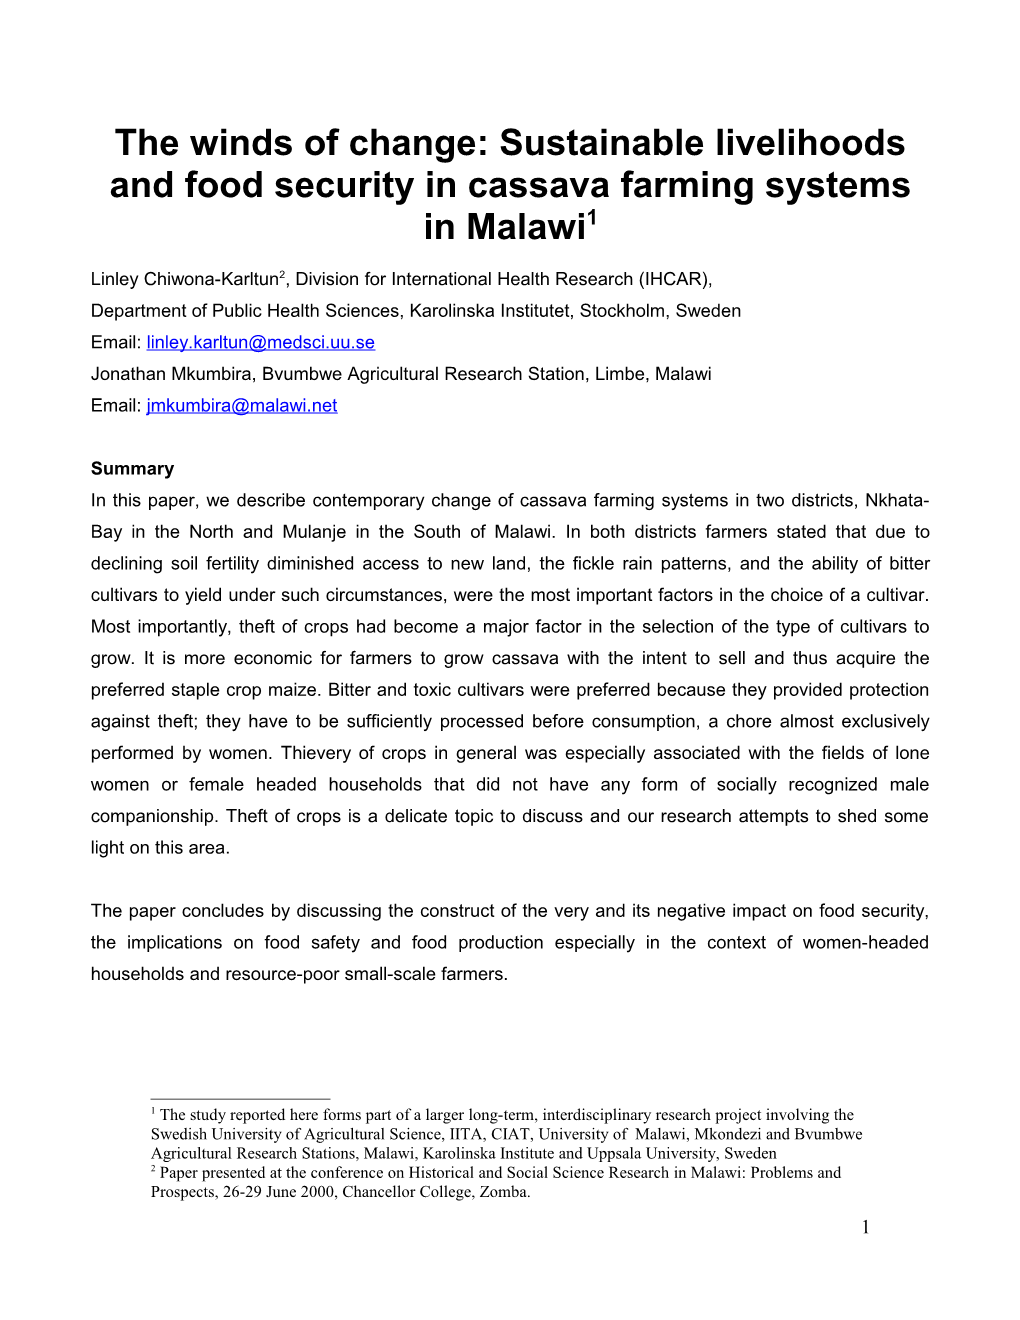 The Winds Of Change: Sustainable Livelihoods And Food Security In Cassava Farming Systems In Malawi